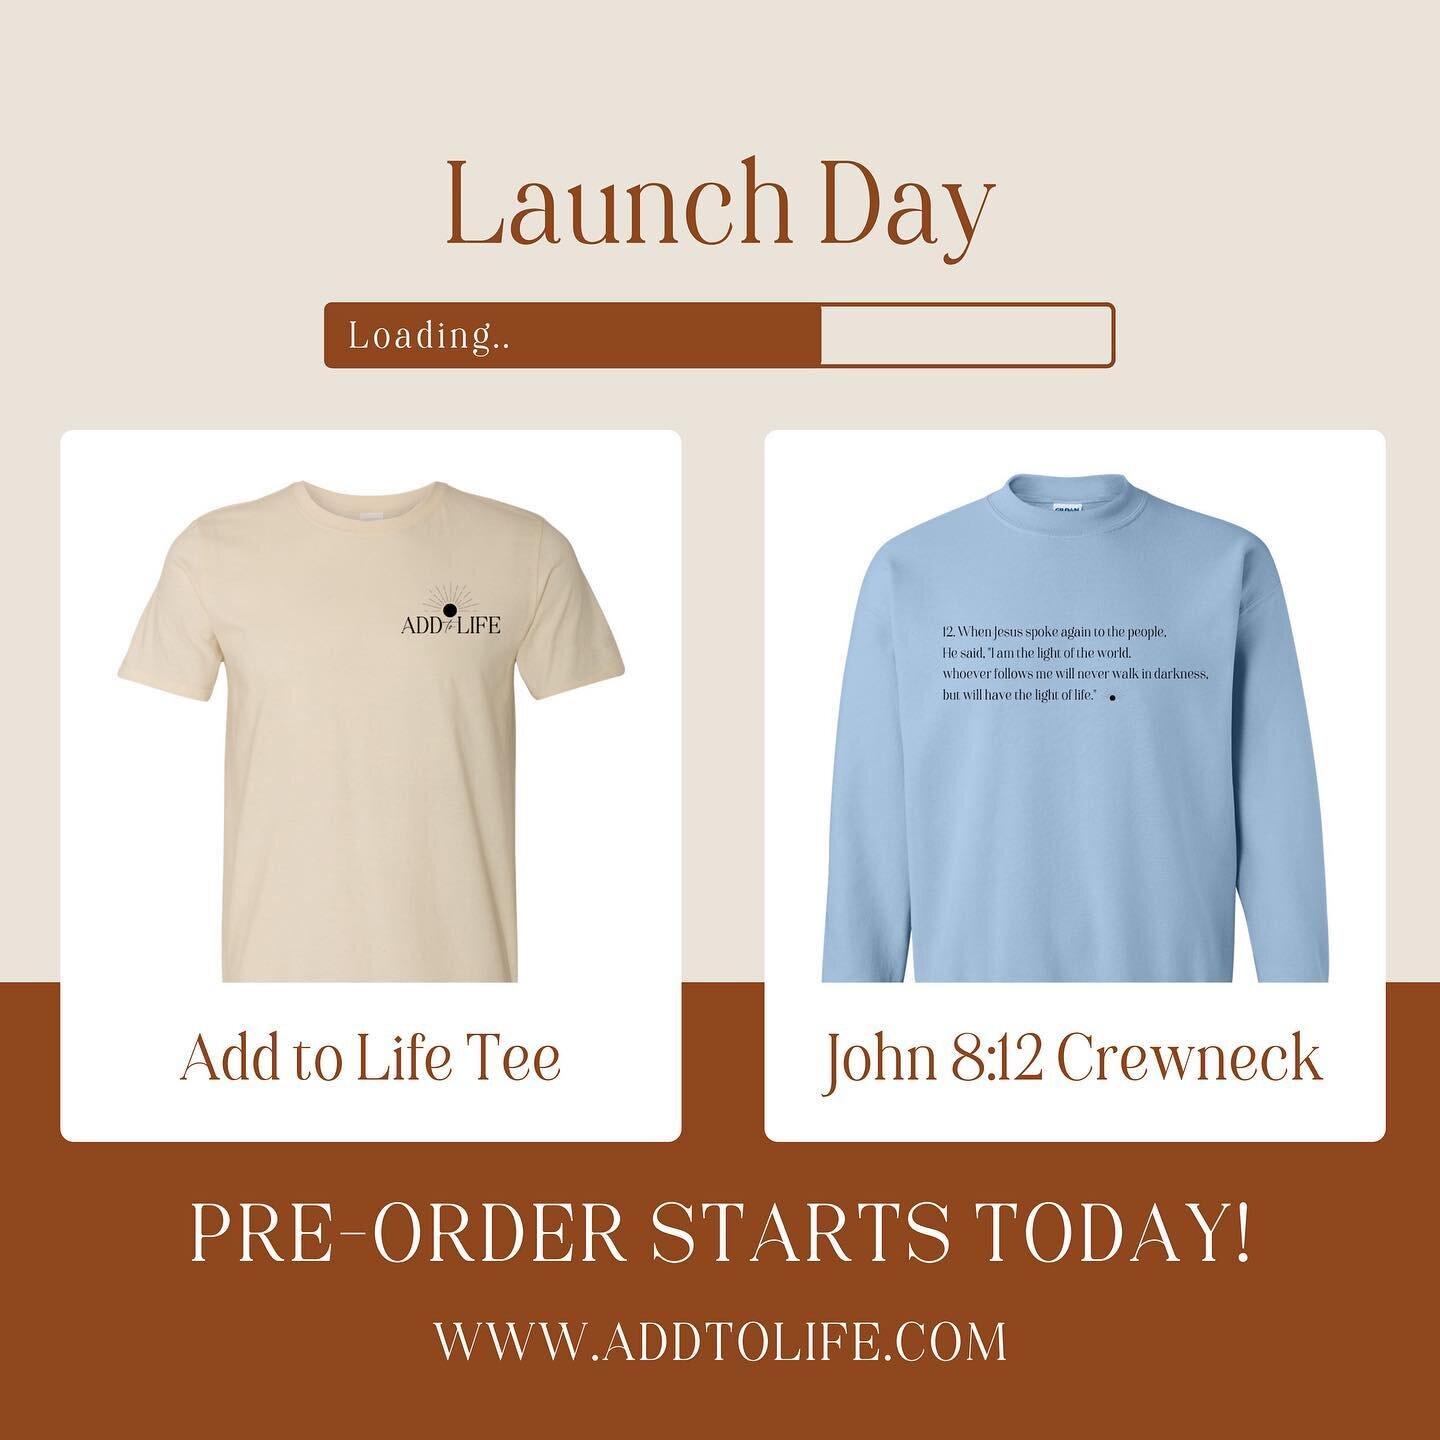 NEW NEW NEW 🎉🎉🎉

NOW ACCEPTING pre-orders for the Add to Life Tee and the John 8:12 Crewneck! Limited time offer, so don&rsquo;t miss your chance! 

Pre-order starting TODAY! 
▫️Add to Life Tee for $15
▫️John 8:12 Crewneck for $24

Sizes available